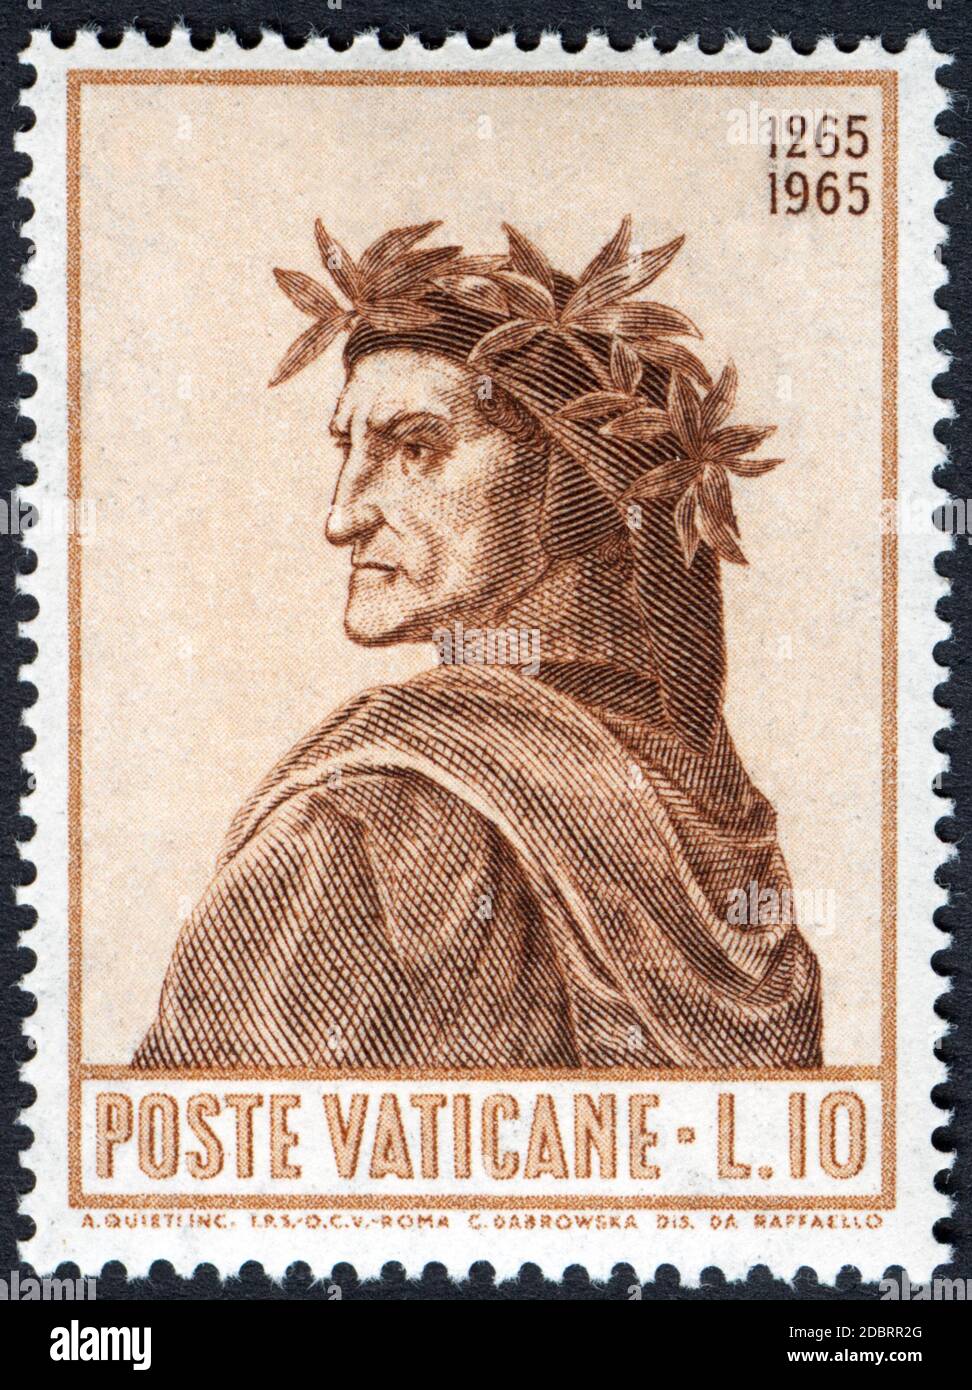 Vatican City Stamps,25 Diff, Vatican City,Stamps,Postage Stamps,Stamp  Collection,Pope,Vatican Stamps, Vatican City Postage Stamps,Religious